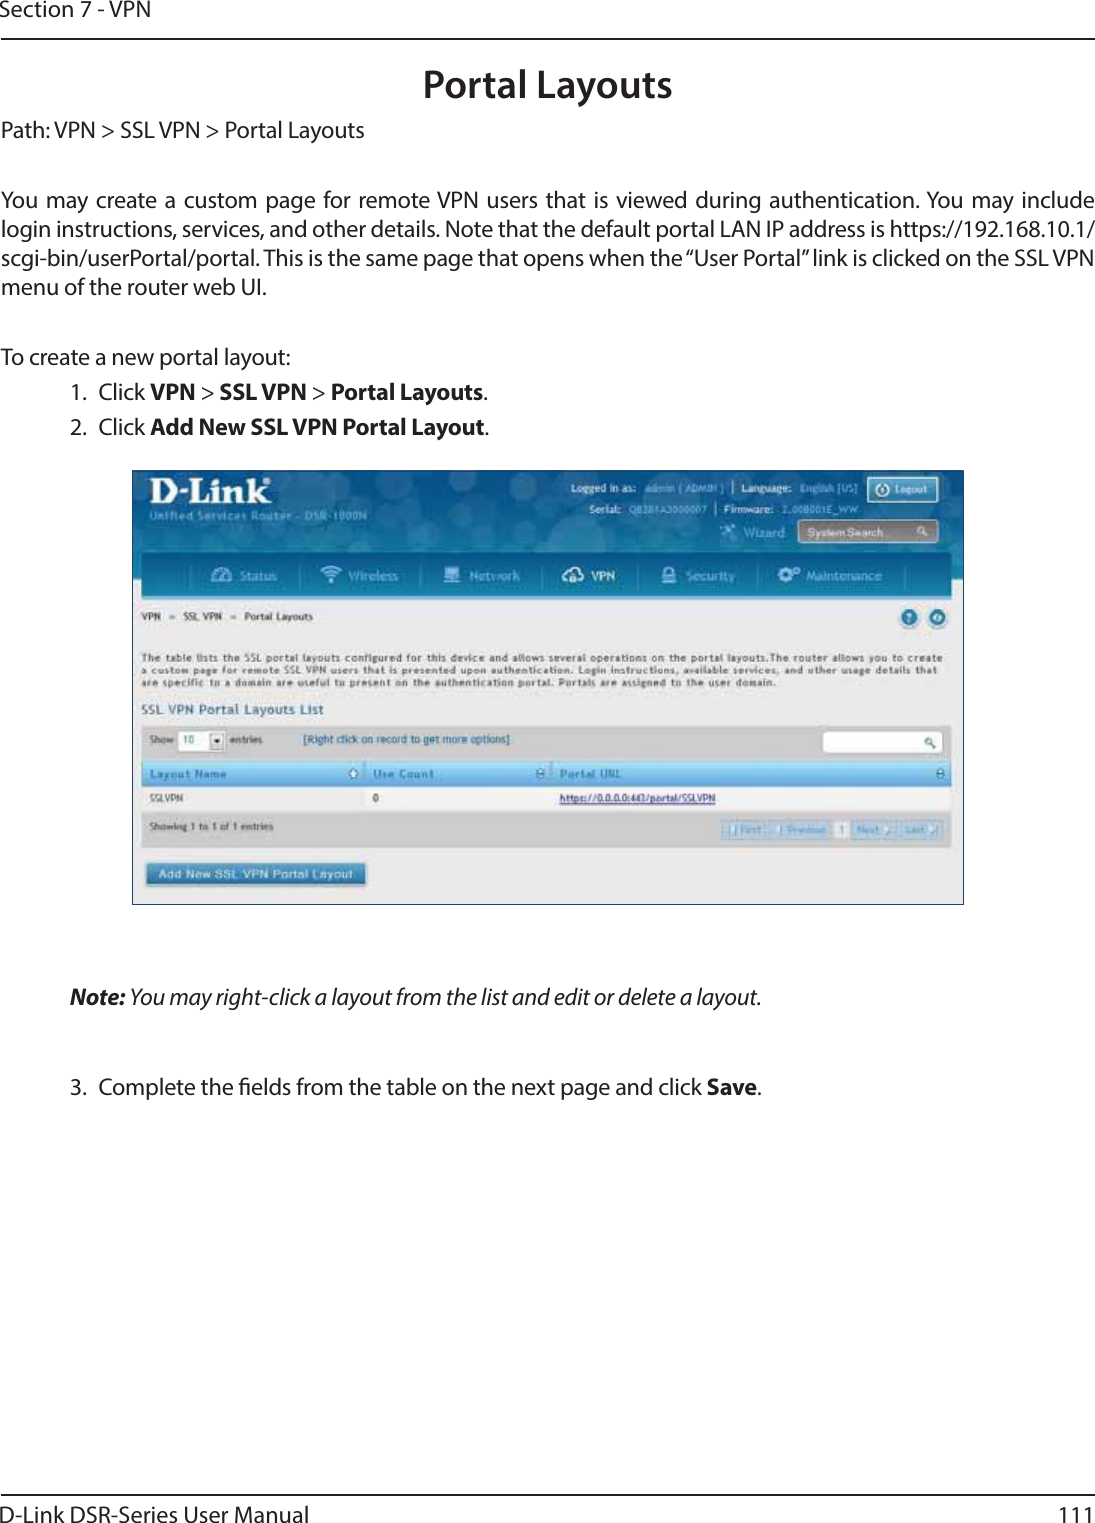 D-Link DSR-Series User Manual 111Section 7 - VPNPortal LayoutsPath: VPN &gt; SSL VPN &gt; Portal LayoutsYou may create a custom page for remote VPN users that is viewed during authentication. You may include login instructions, services, and other details. Note that the default portal LAN IP address is https://192.168.10.1/scgi-bin/userPortal/portal. This is the same page that opens when the “User Portal” link is clicked on the SSL VPN menu of the router web UI. To create a new portal layout:1. Click VPN &gt; SSL VPN &gt; Portal Layouts.2. Click Add New SSL VPN Portal Layout.Note: You may right-click a layout from the list and edit or delete a layout.3.  Complete the elds from the table on the next page and click Save.